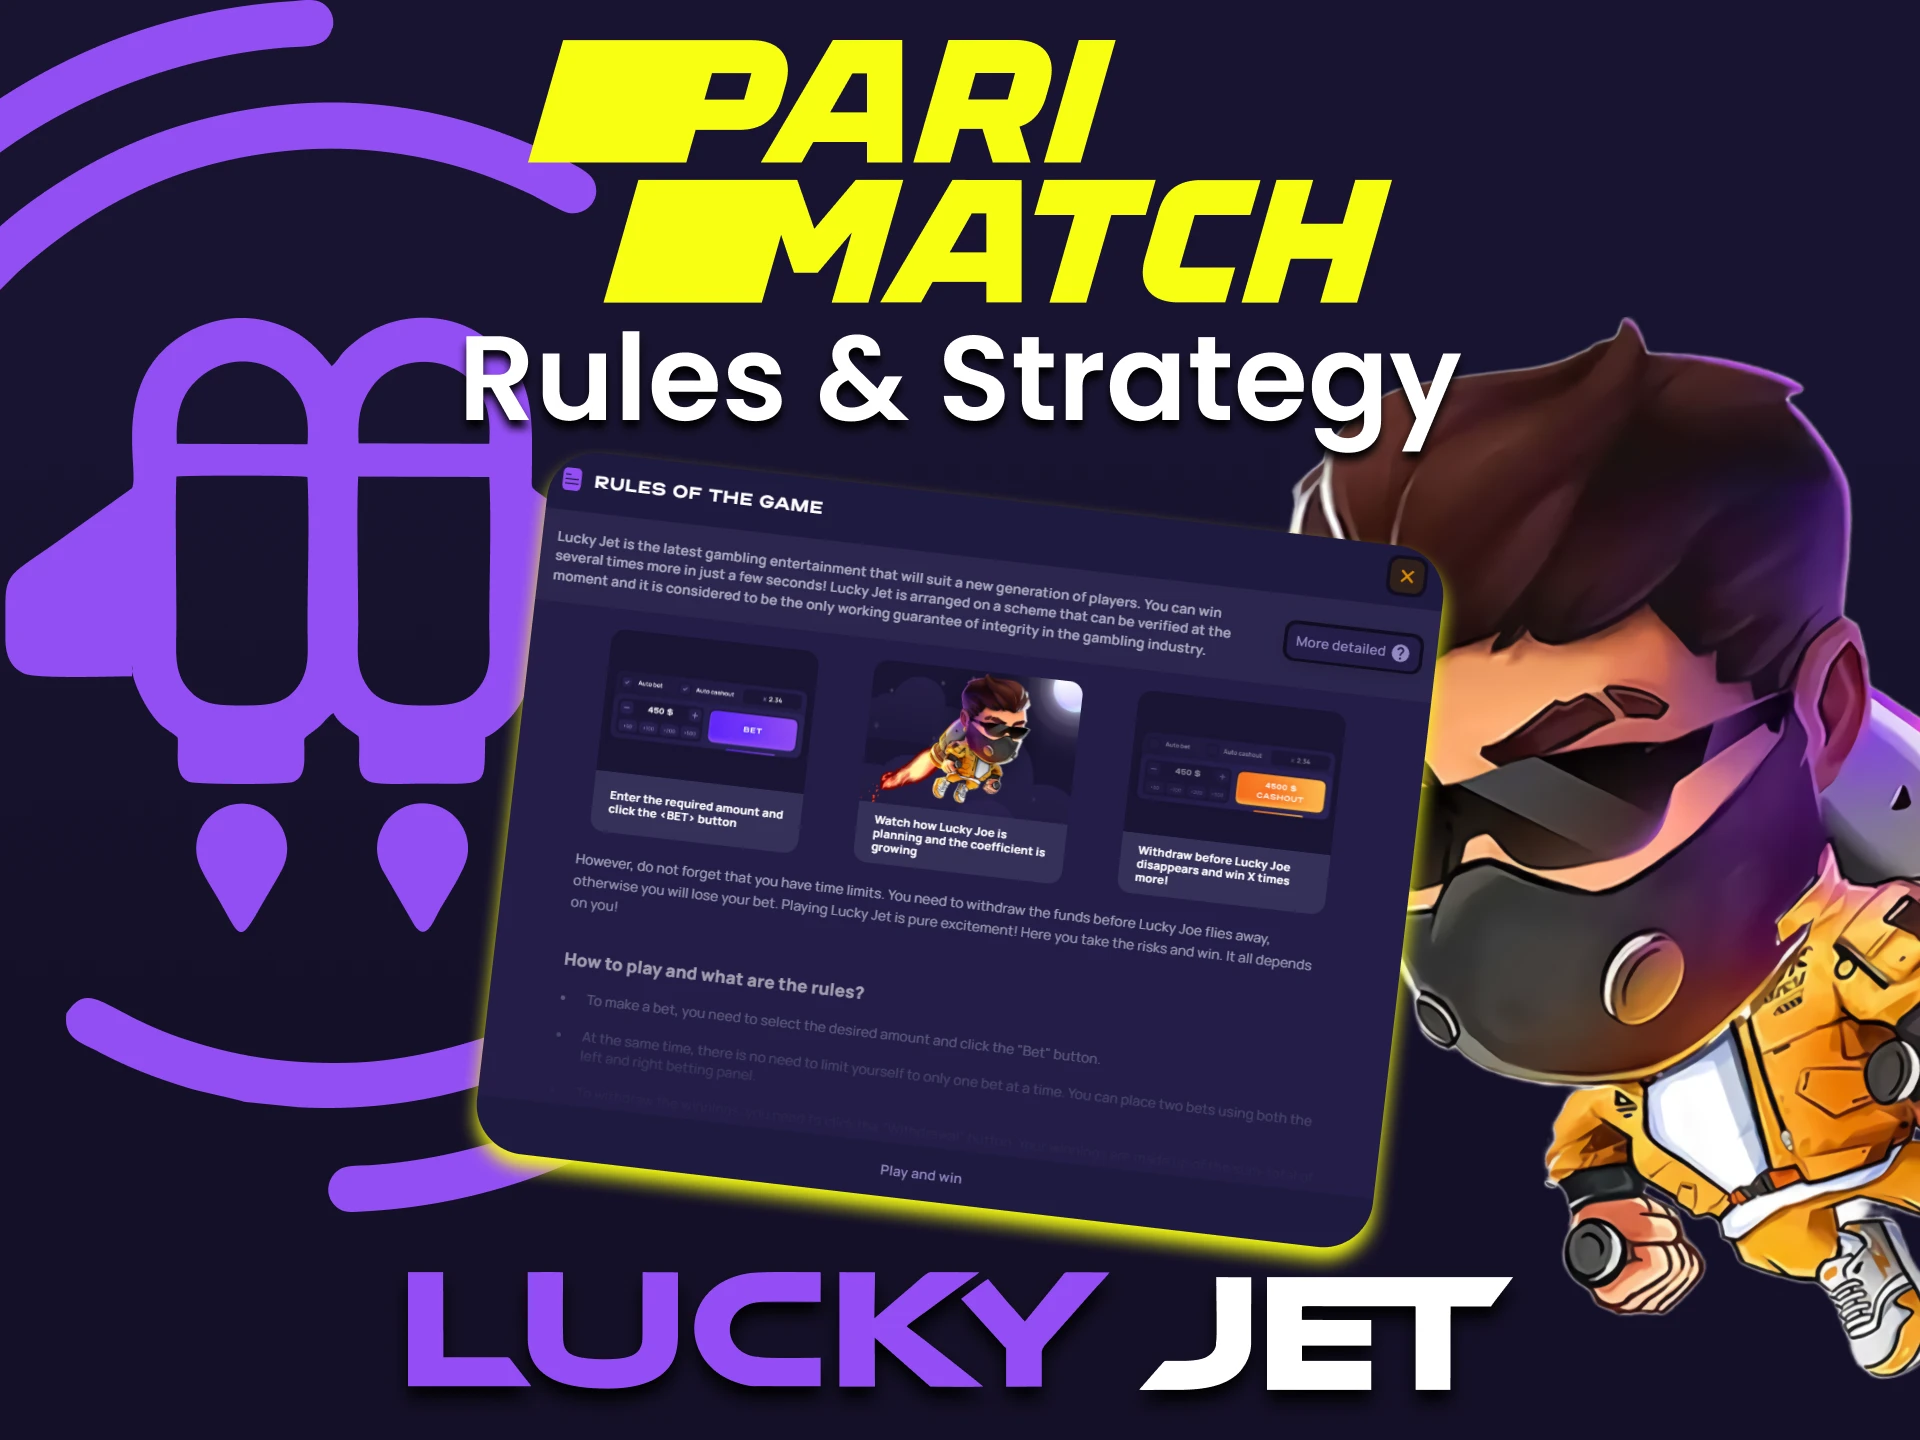 Learn the rules and choose your strategy for Lucky Jet at Parimatch.